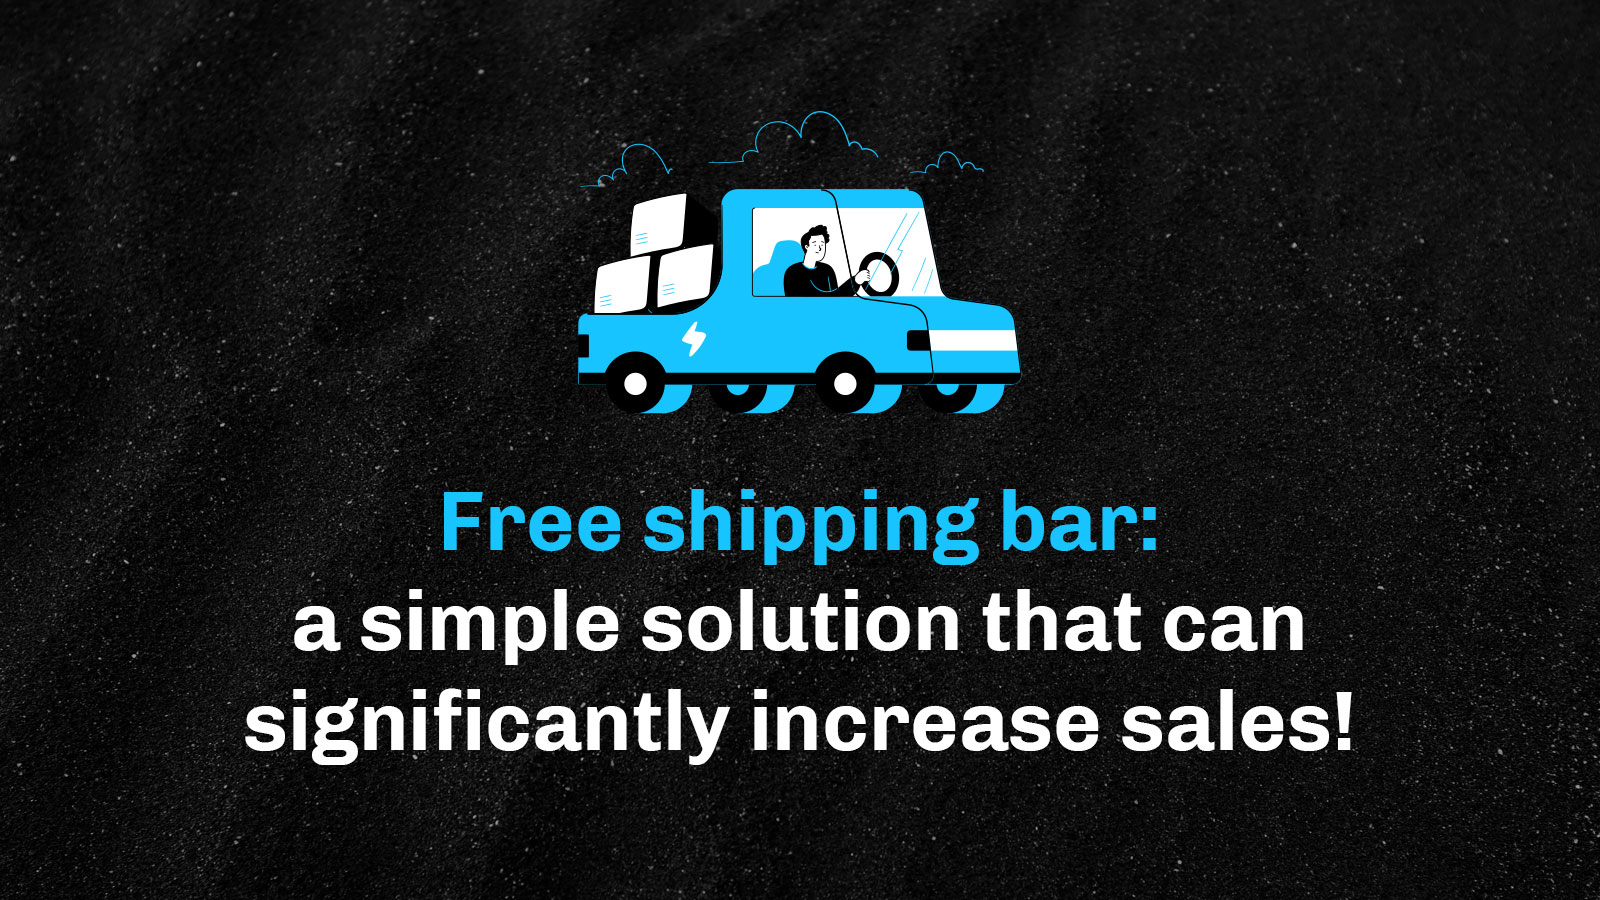 Free shipping bar: a simple solution that can significantly increase sales